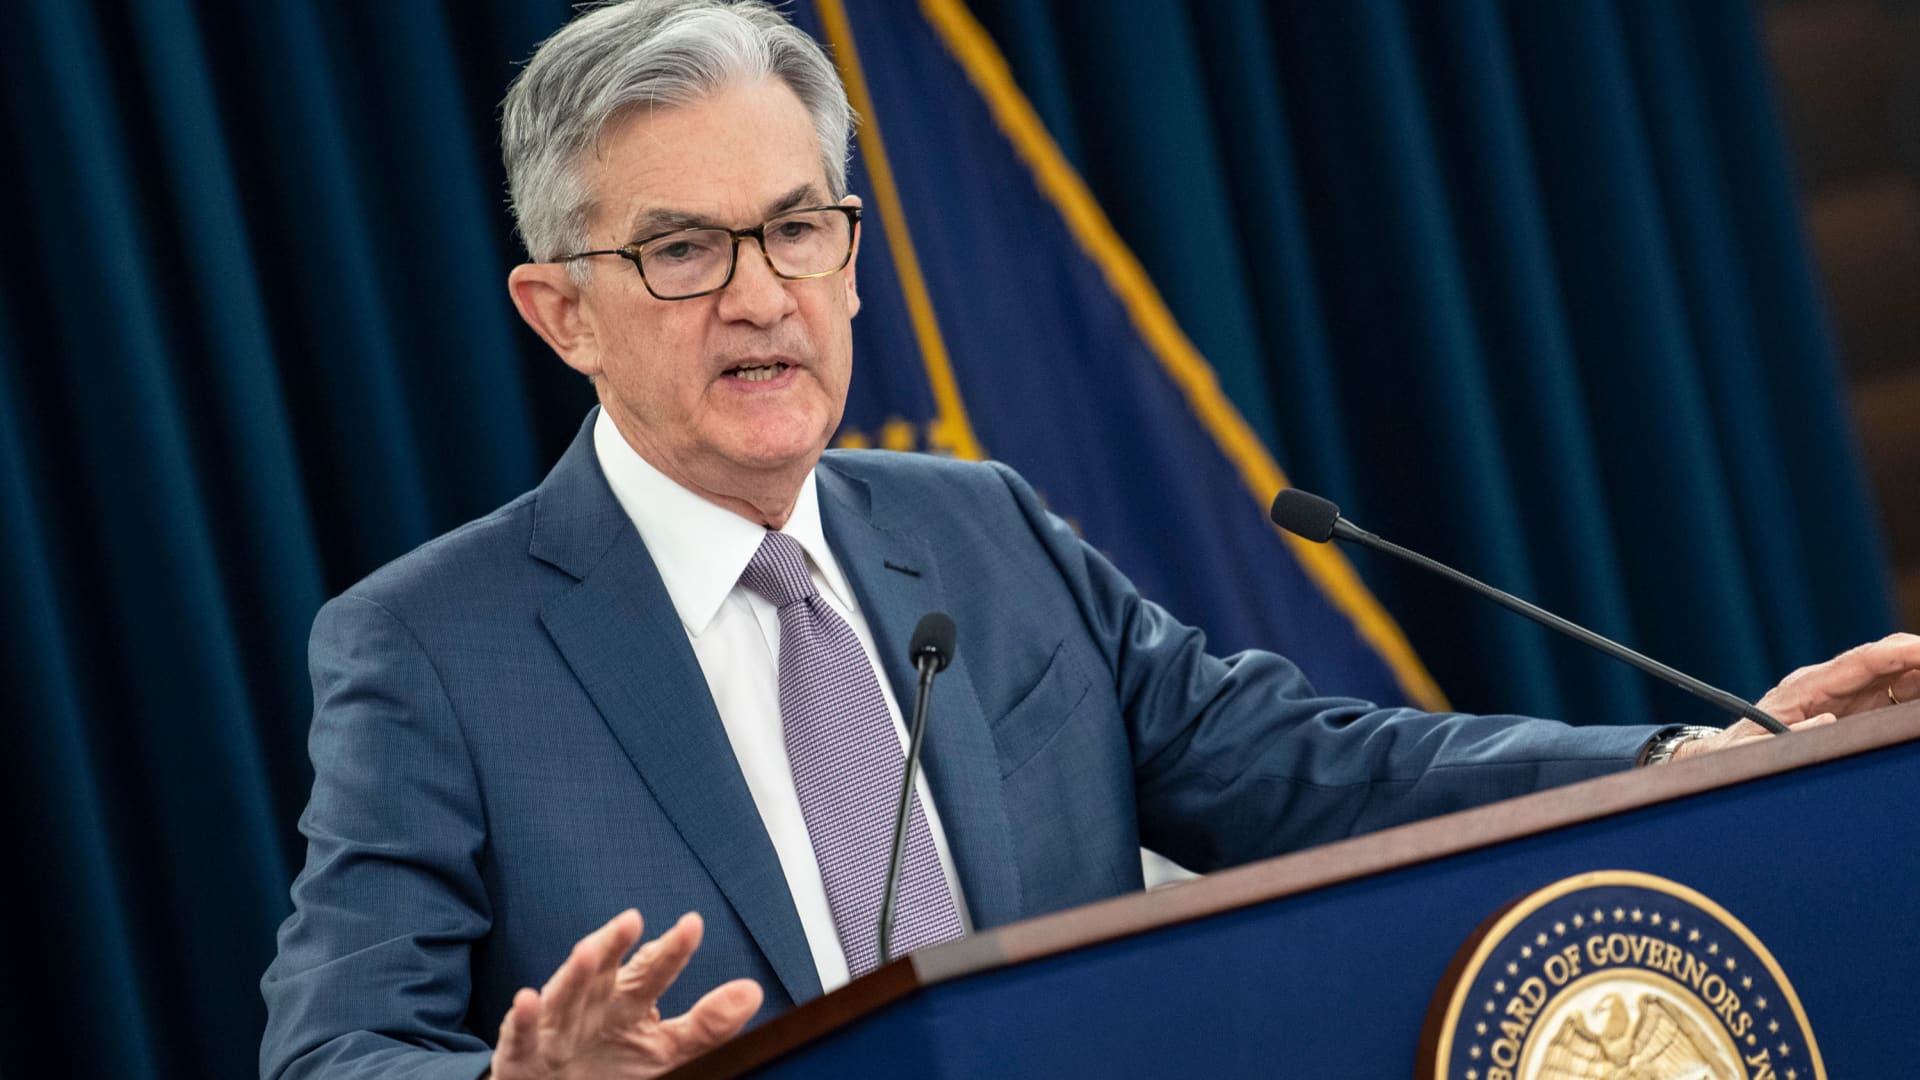 The Fed is now expected to keep raising rates then hold them there, CNBC survey shows